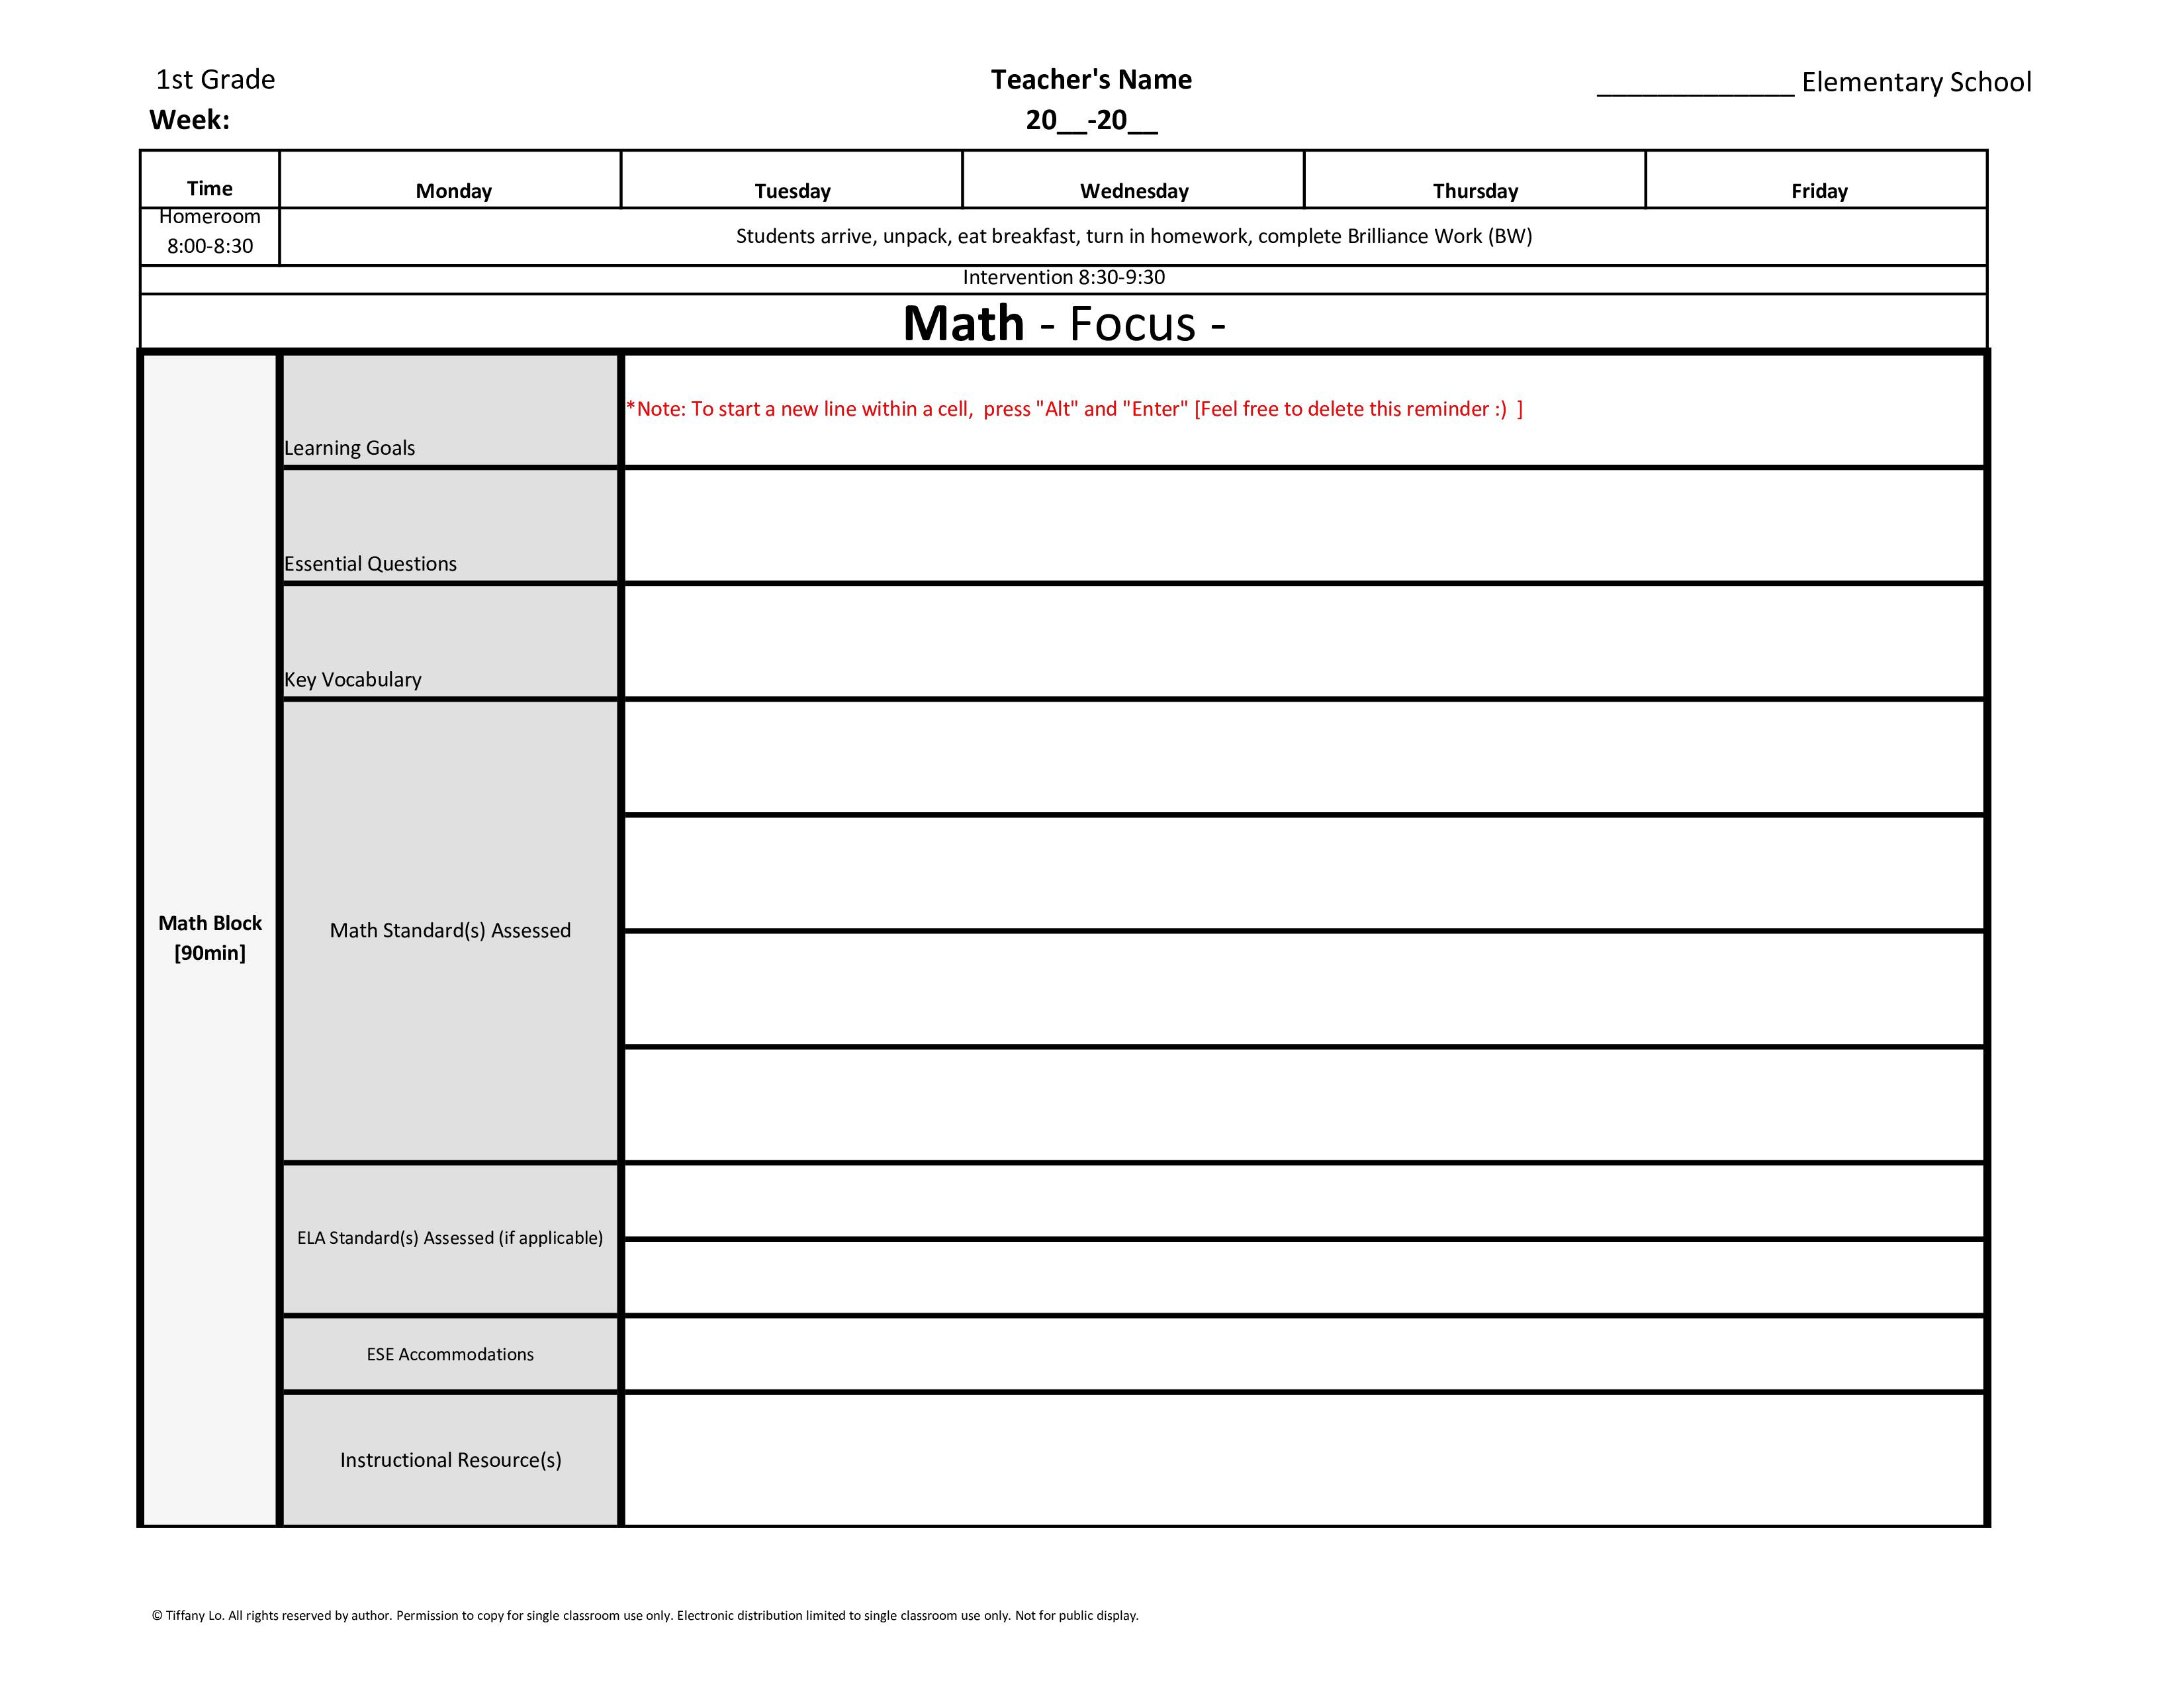 1st First Grade Weekly Lesson Plan Template w/ Florida Standards Drop